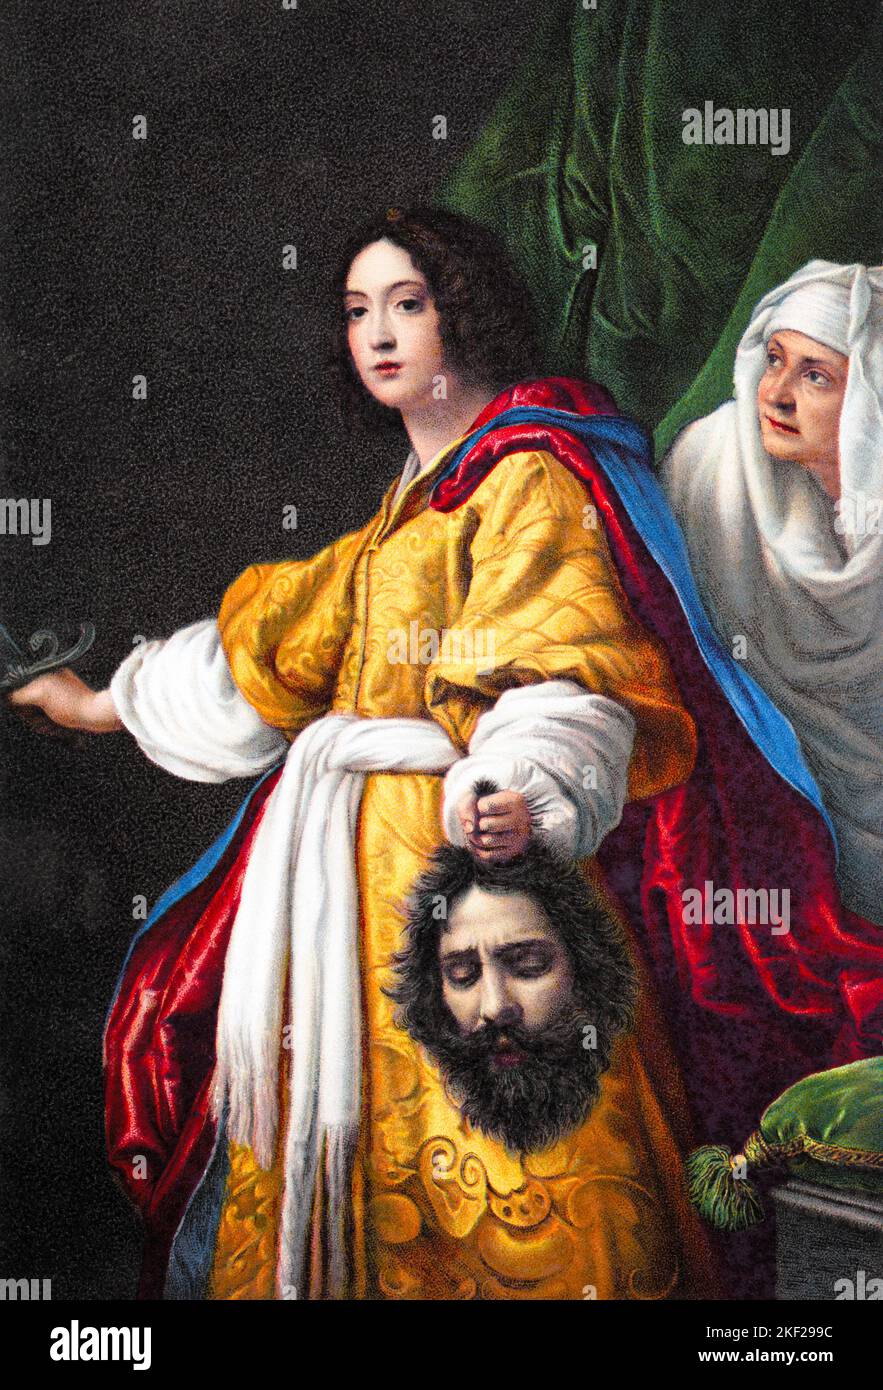 1620s JUDITH WITH THE HEAD OF HOLOFERNE IS AN OIL PAINTING BY CRISTOFANO ALLORI TALE FROM OLD TESTAMENT BOOK OF JUDITH  - ka9441 HAR001 HARS POSTCARD TALE DECAPITATION JUDITH MID-ADULT MID-ADULT MAN SOLUTIONS YOUNG ADULT WOMAN 1620s HAR001 HEBREW JEWISH OLD FASHIONED Stock Photo